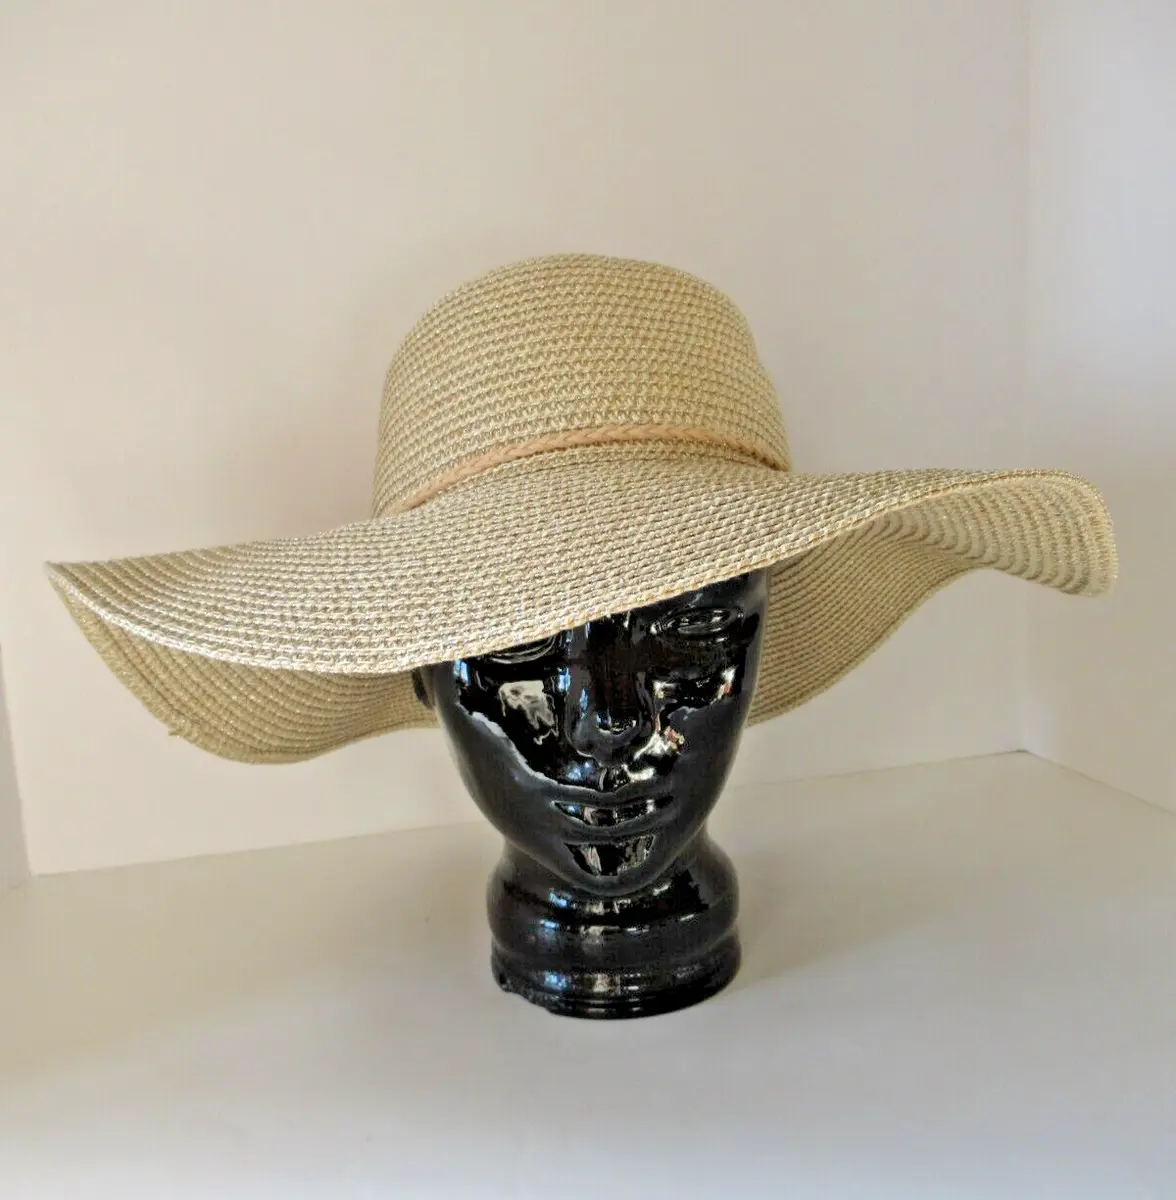 Vintage straw hat natural with gold womens floppy style beige suede braided band